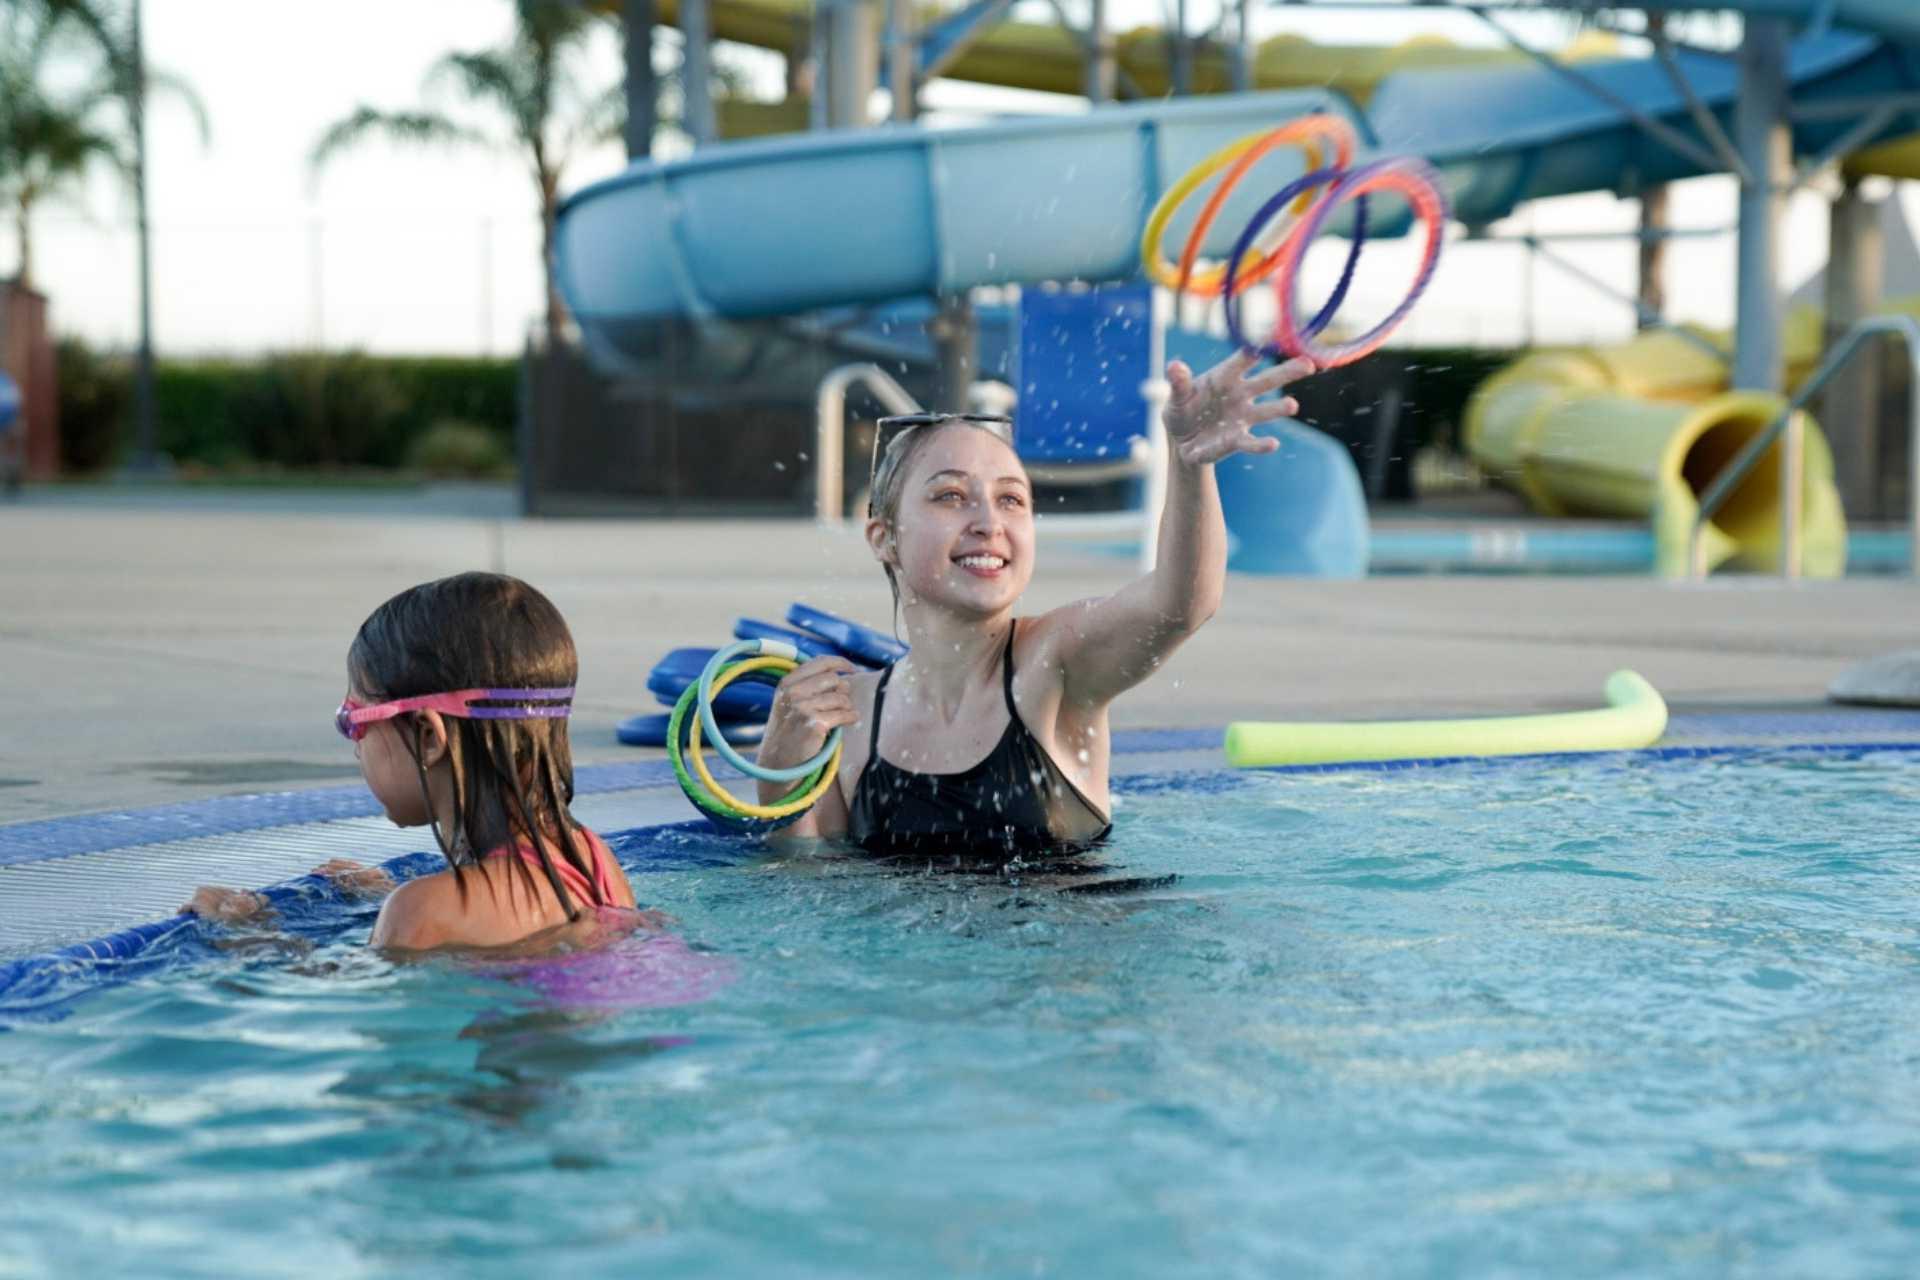 Swim instructor throwing rings for participant